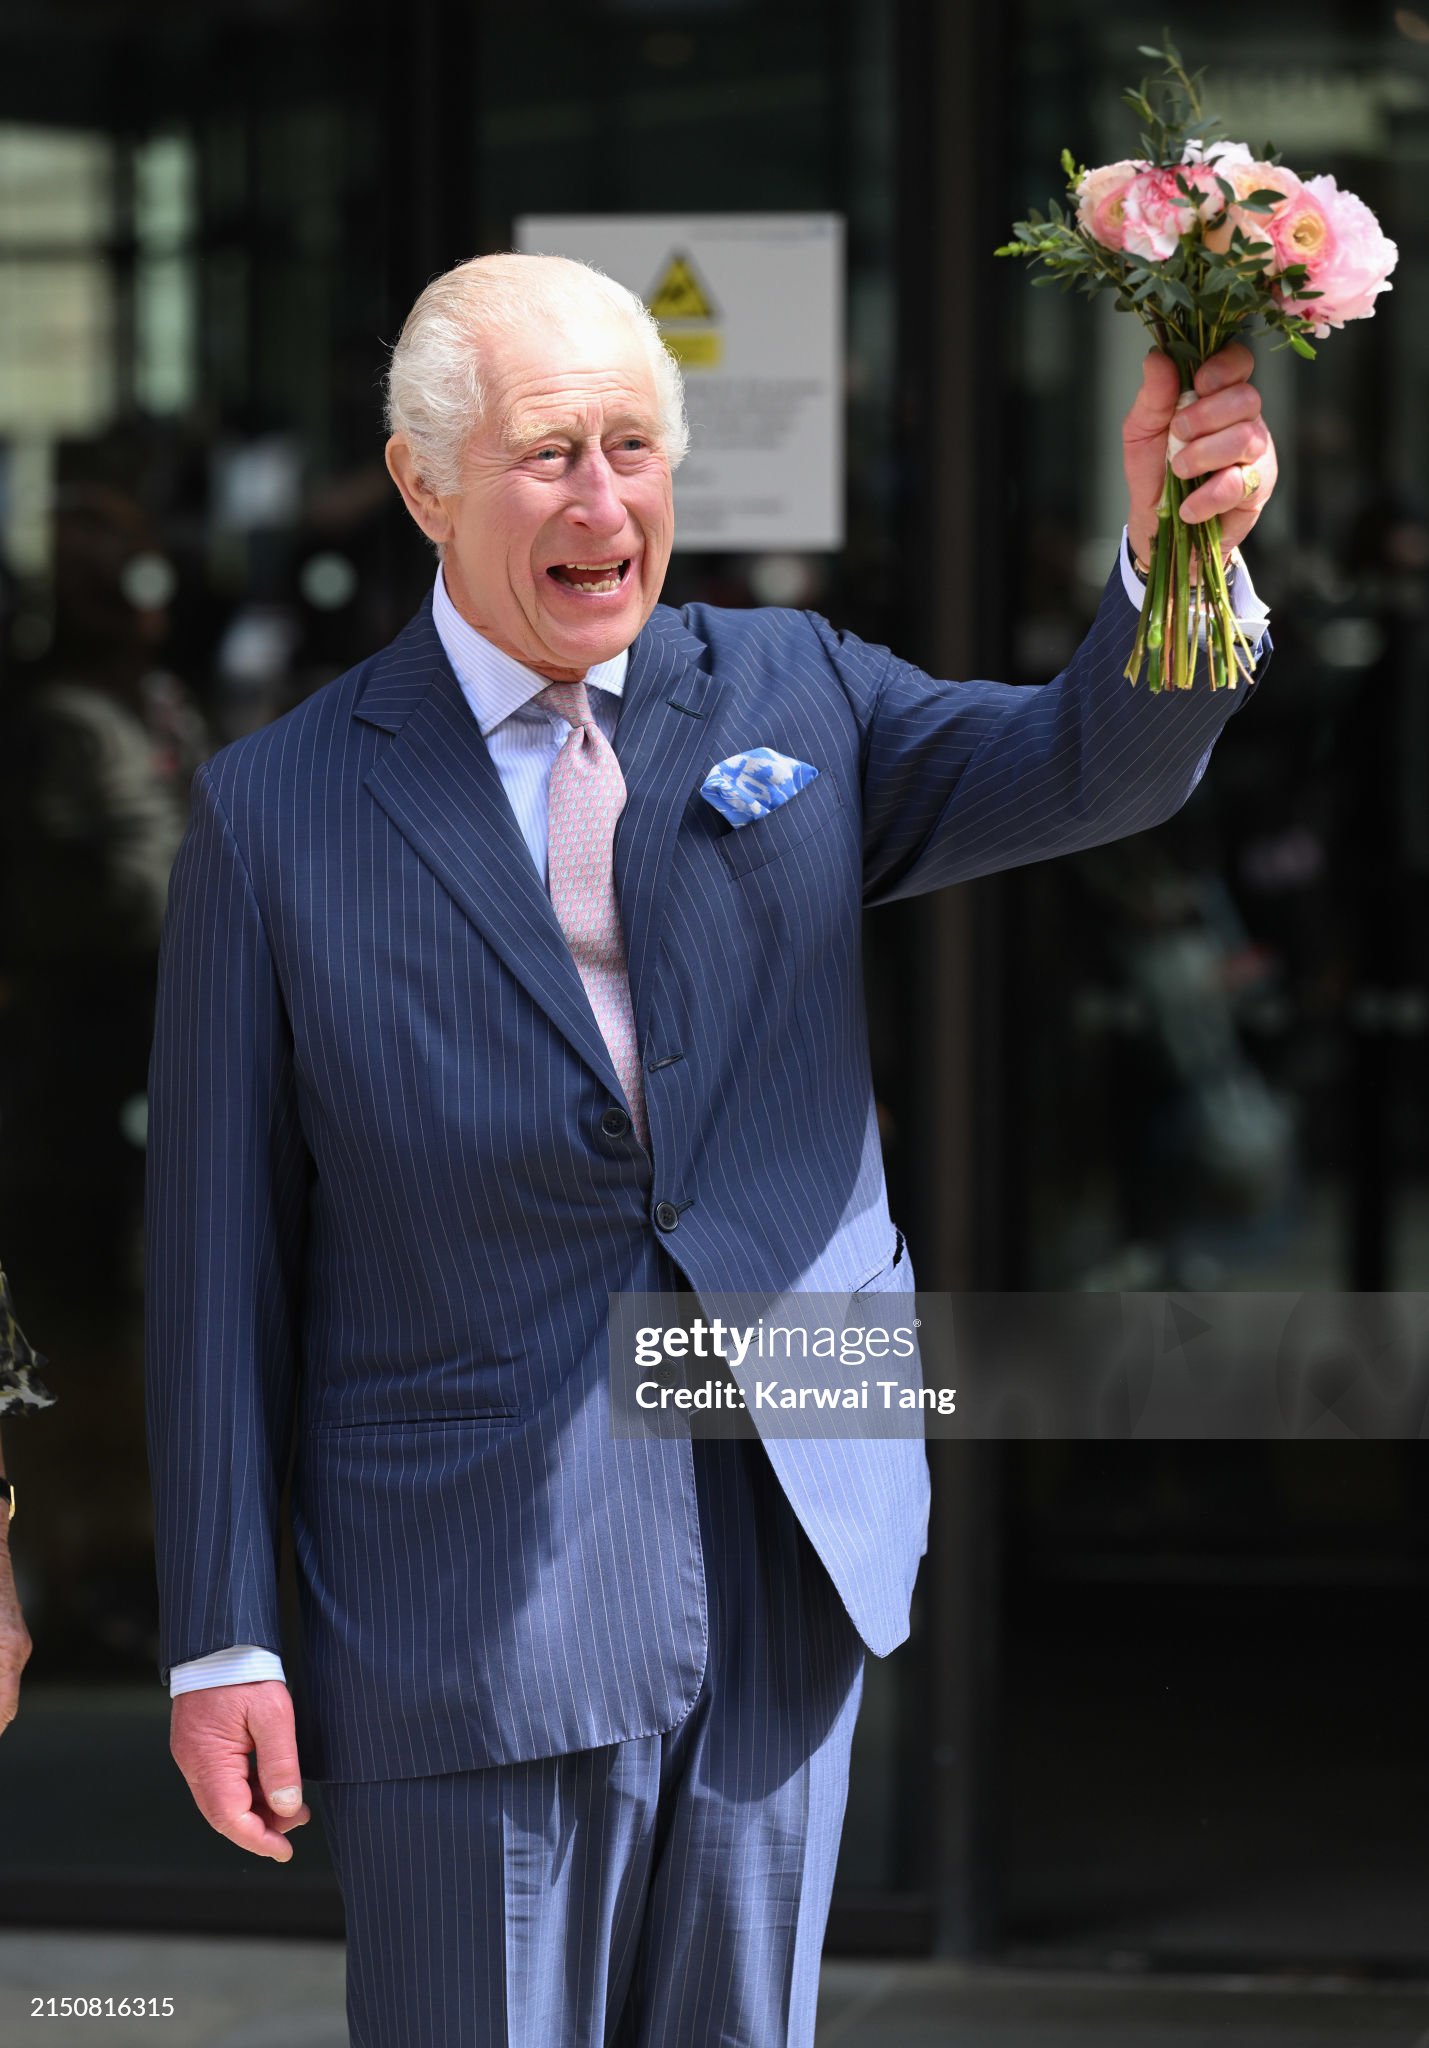 king-charles-iii-and-queen-camilla-visit-university-college-hospital-macmillan-cancer-centre.jpg?s=2048x2048&w=gi&k=20&c=aYBkEks4BE7clKXJqNLY30-3v_StEwUCuuYsv9Rr7zg=